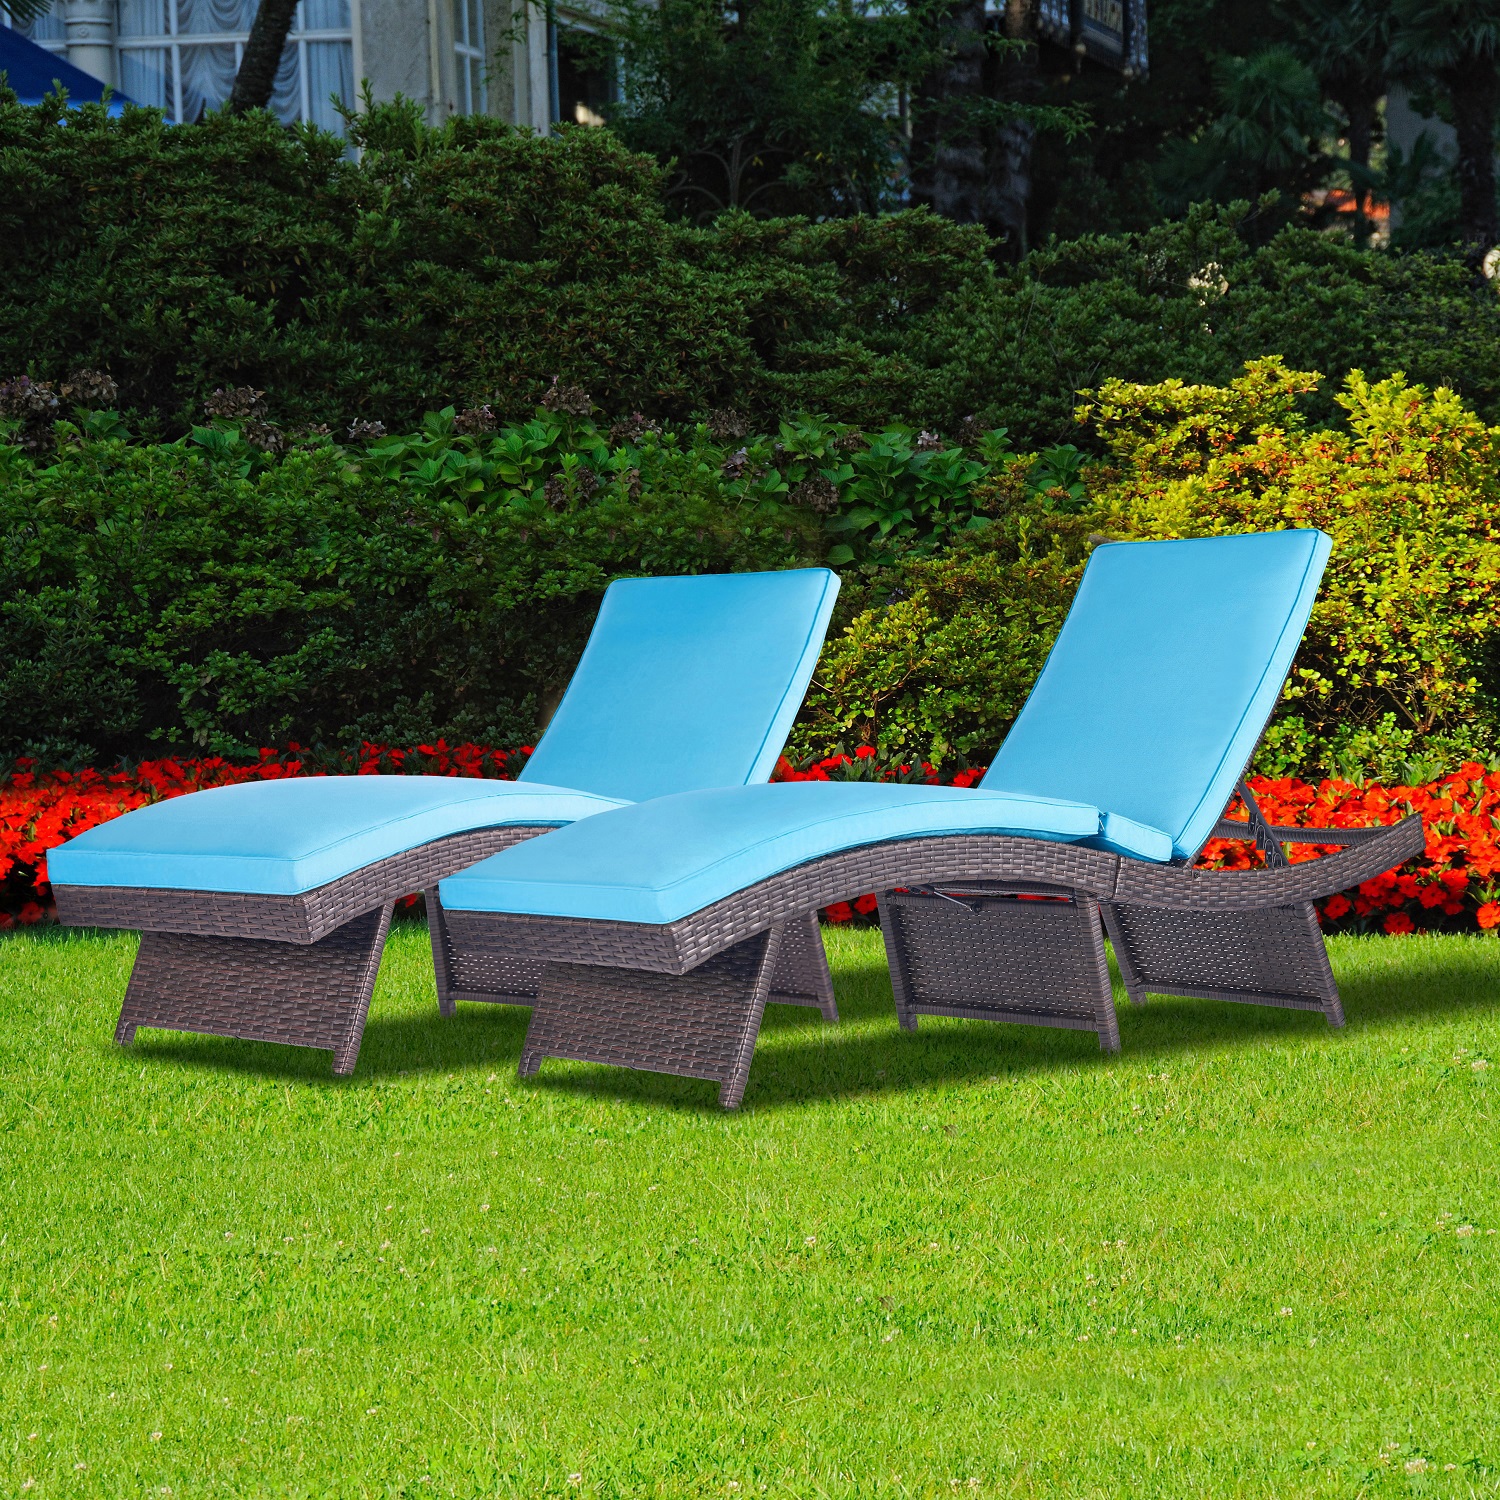 Folding Patio Wicker Chaise Lounge Chairs for Outside Set of 2 Rattan Sunbathing Chaise Lounge Chair Outdoor Assembled Reclining Sunbed Cushion Blue S Type Adjustable Backrest, No Assembly Required - image 3 of 7